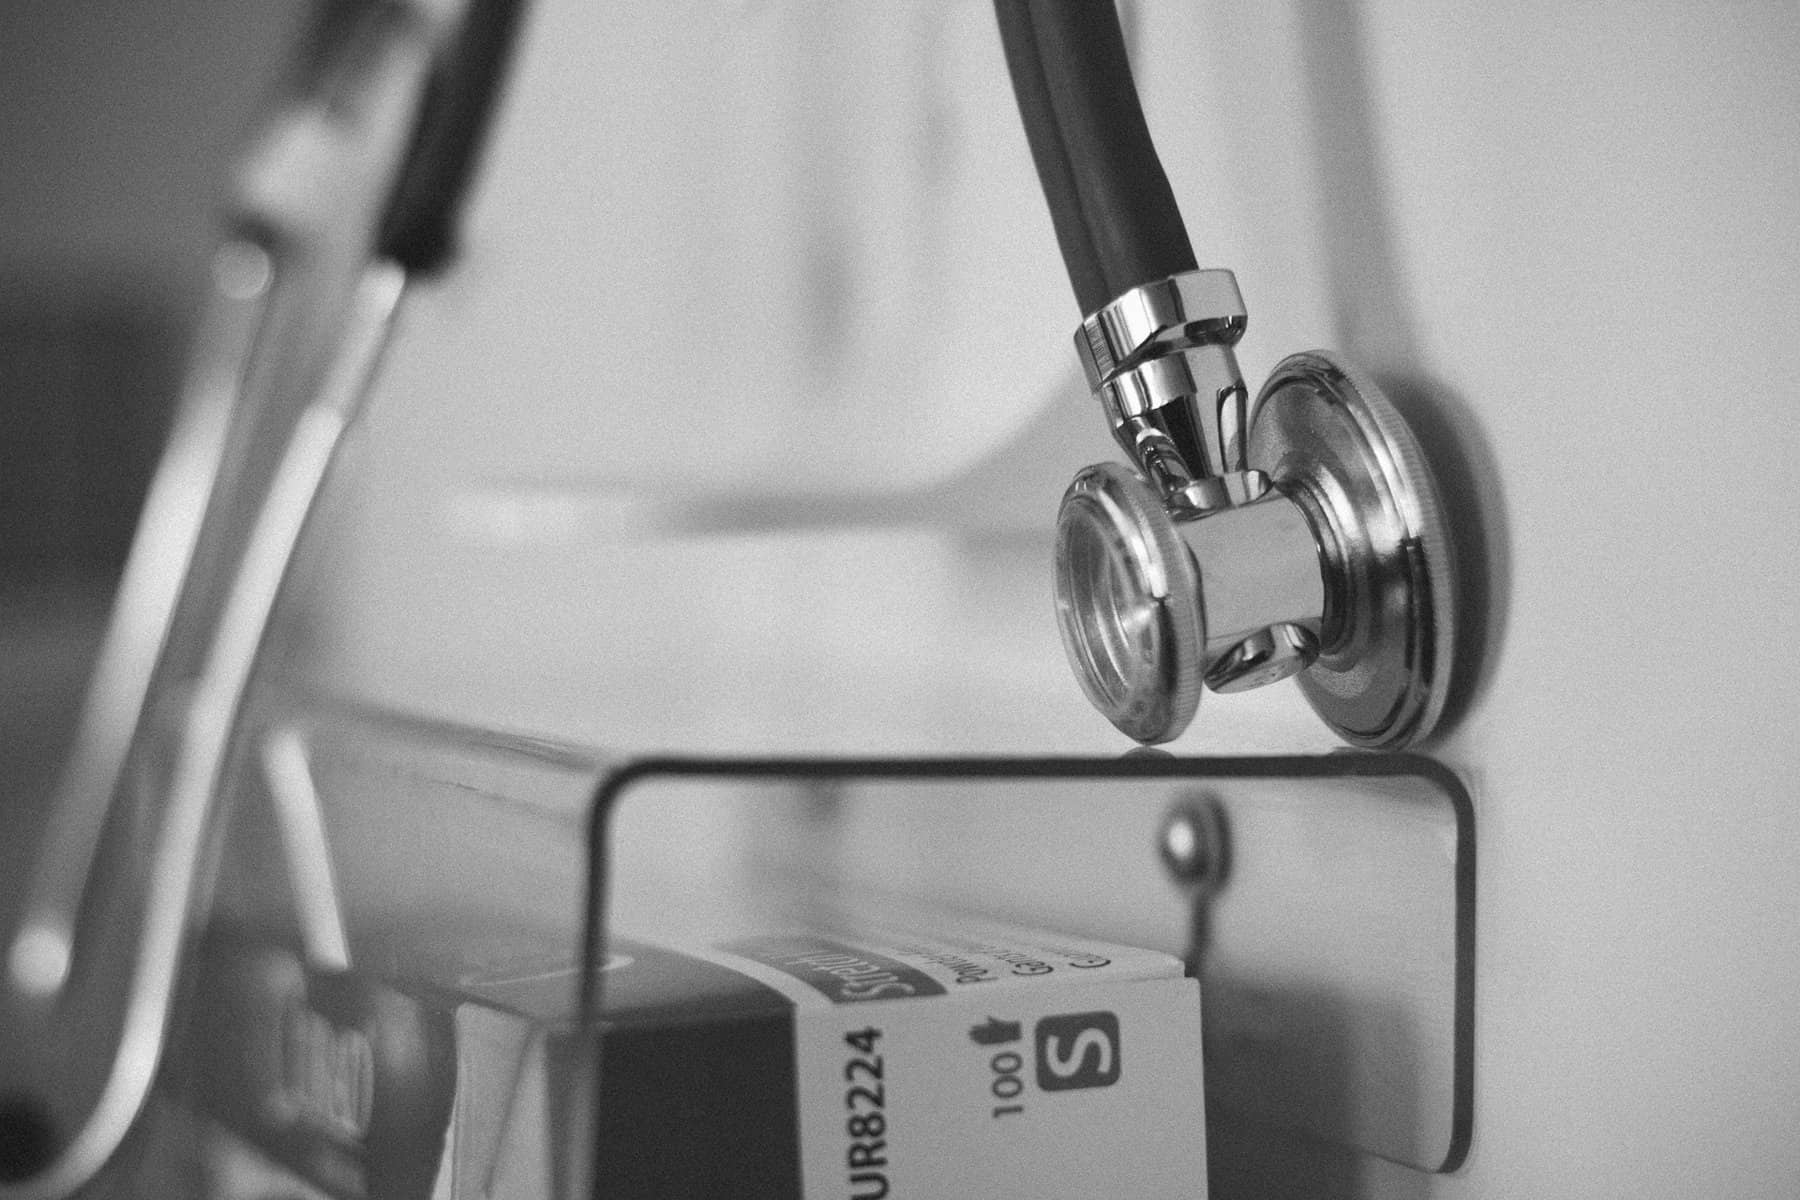 Black and white photo shows a stethoscope hanging near other medical supplies.